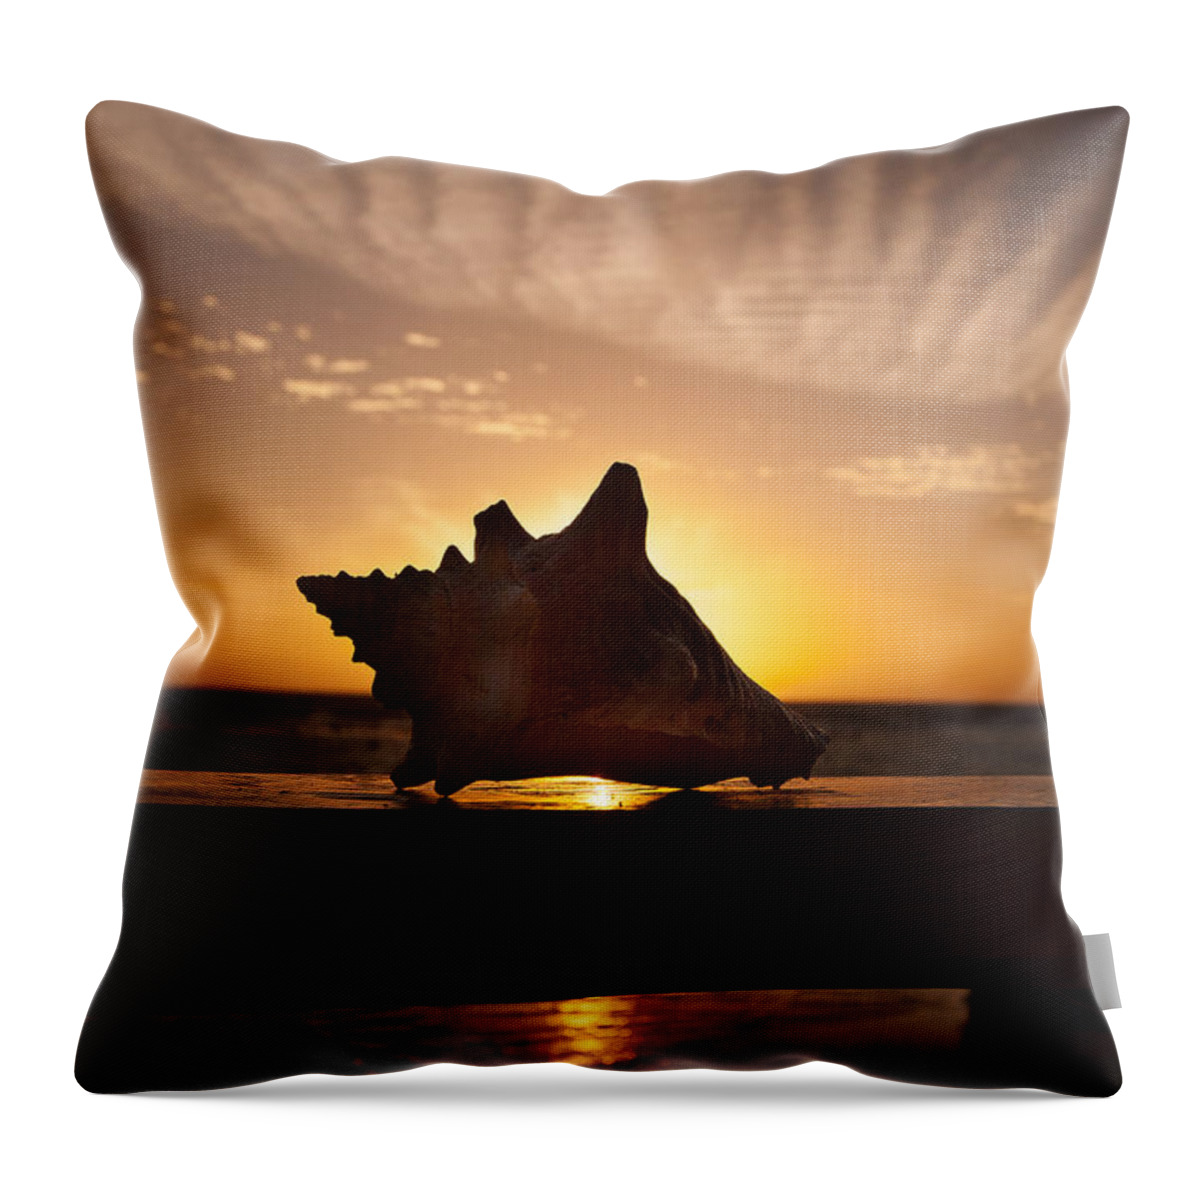 Sunrise Conch Throw Pillow featuring the photograph Sunrise Conch by Jean Noren